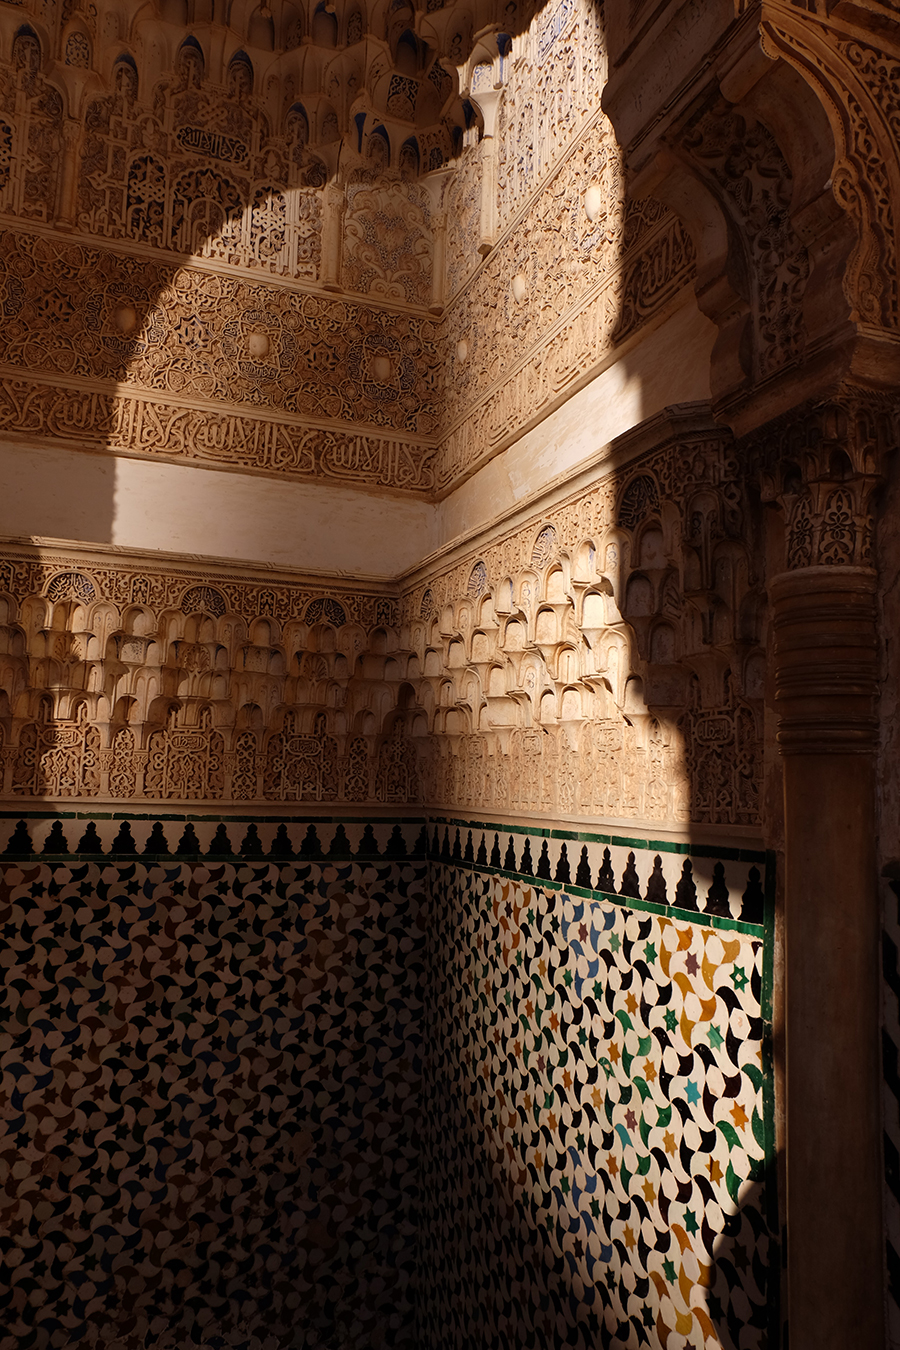 All the details in La Alhambra are just perfect. Mathematically perfect.